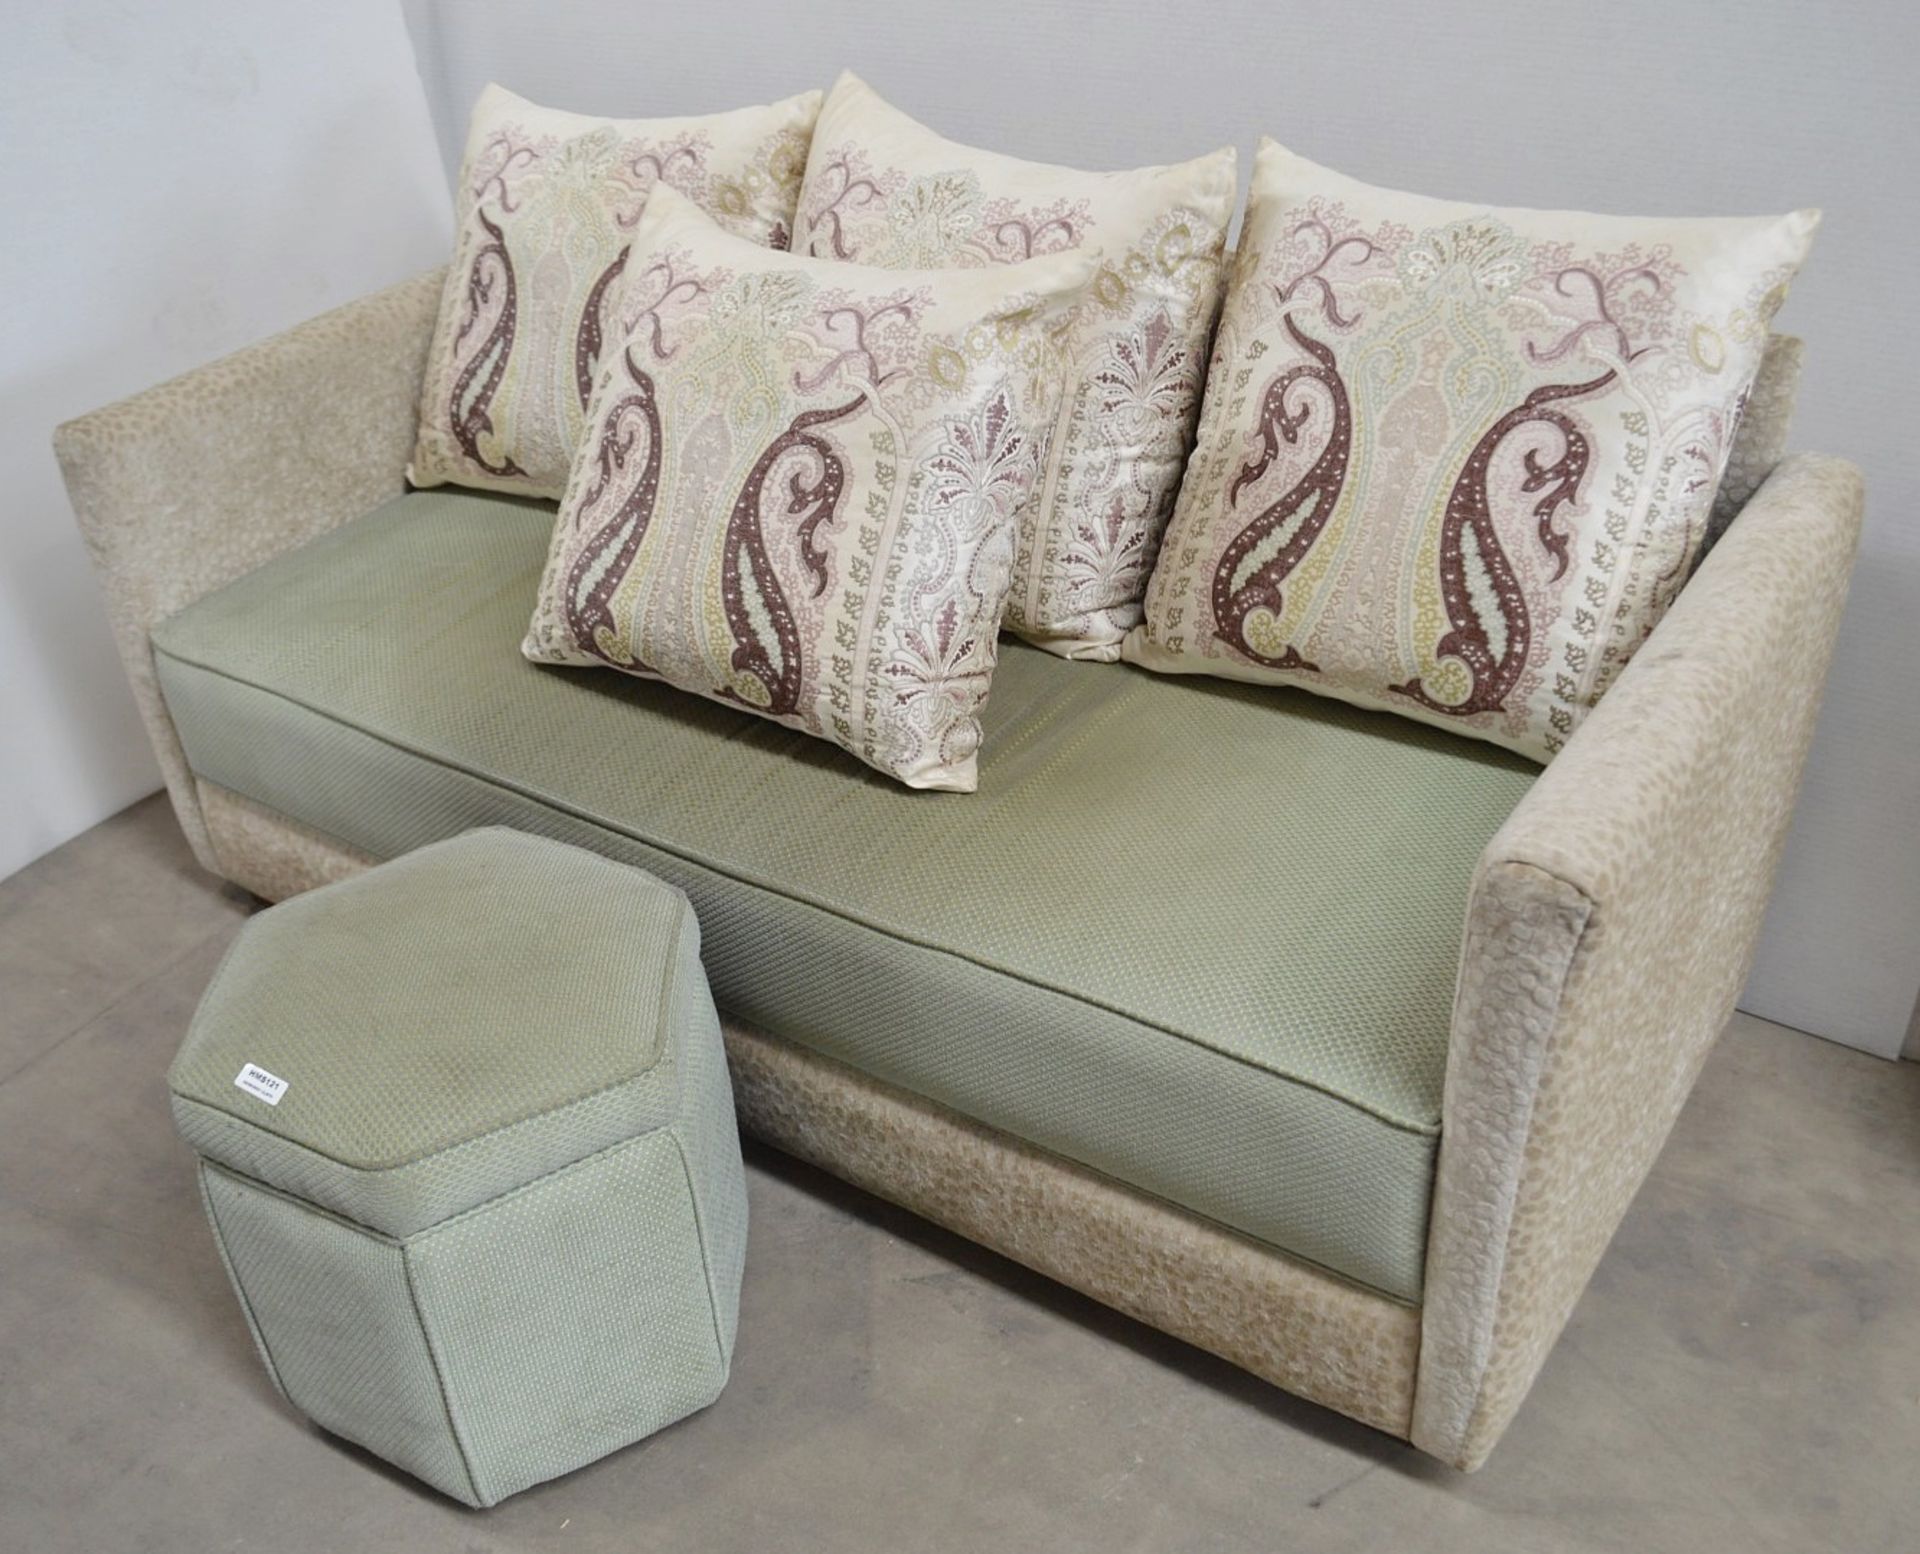 1 x Upholstered Sofa With 4 x Cushions, Pale Green Seat Cushion With Matching Footstool - Ref: - Image 3 of 7